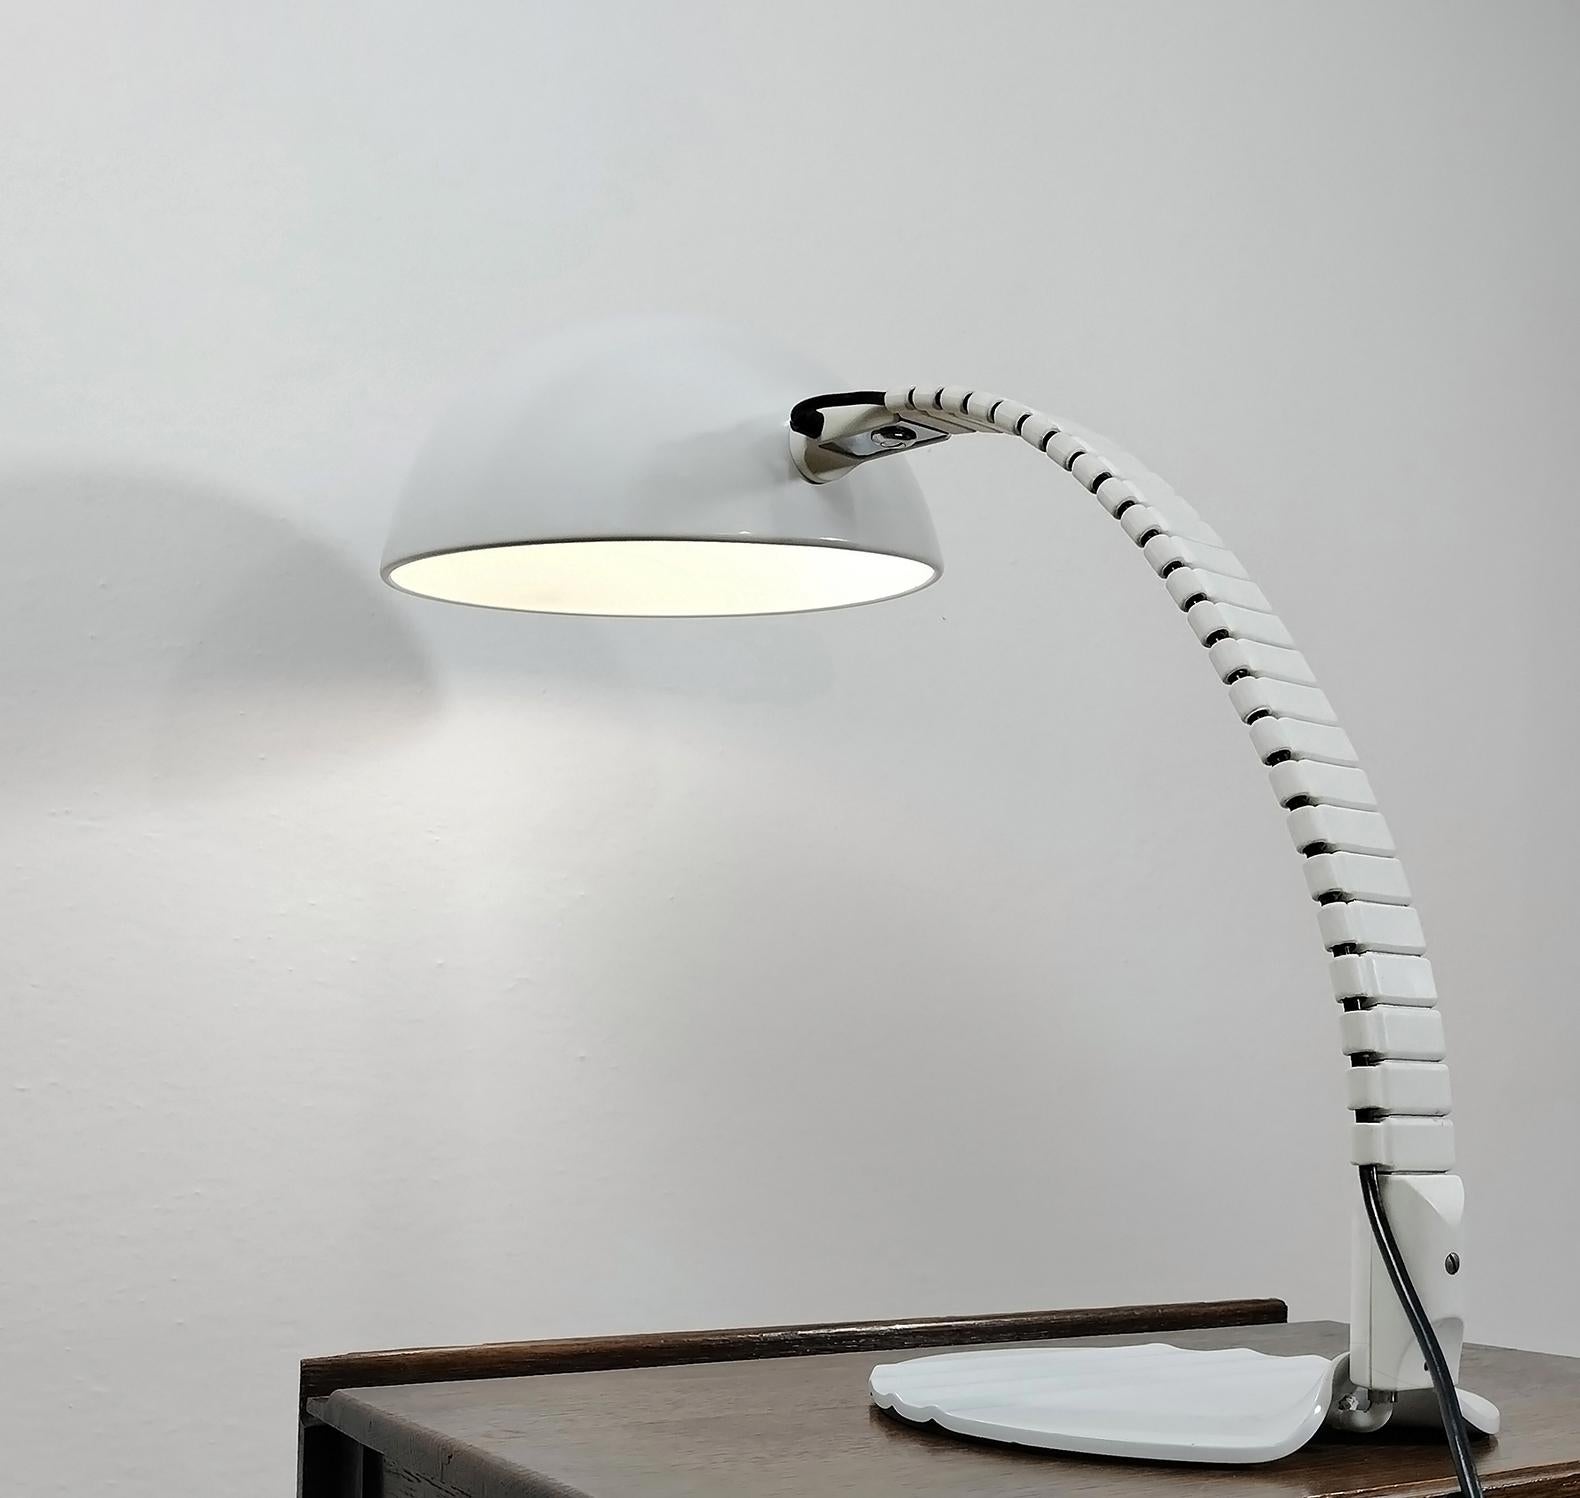 Late 20th Century Flex or 660 Table Lamp in White Metal and Resin by Martinelli Luce 1970s Italy For Sale